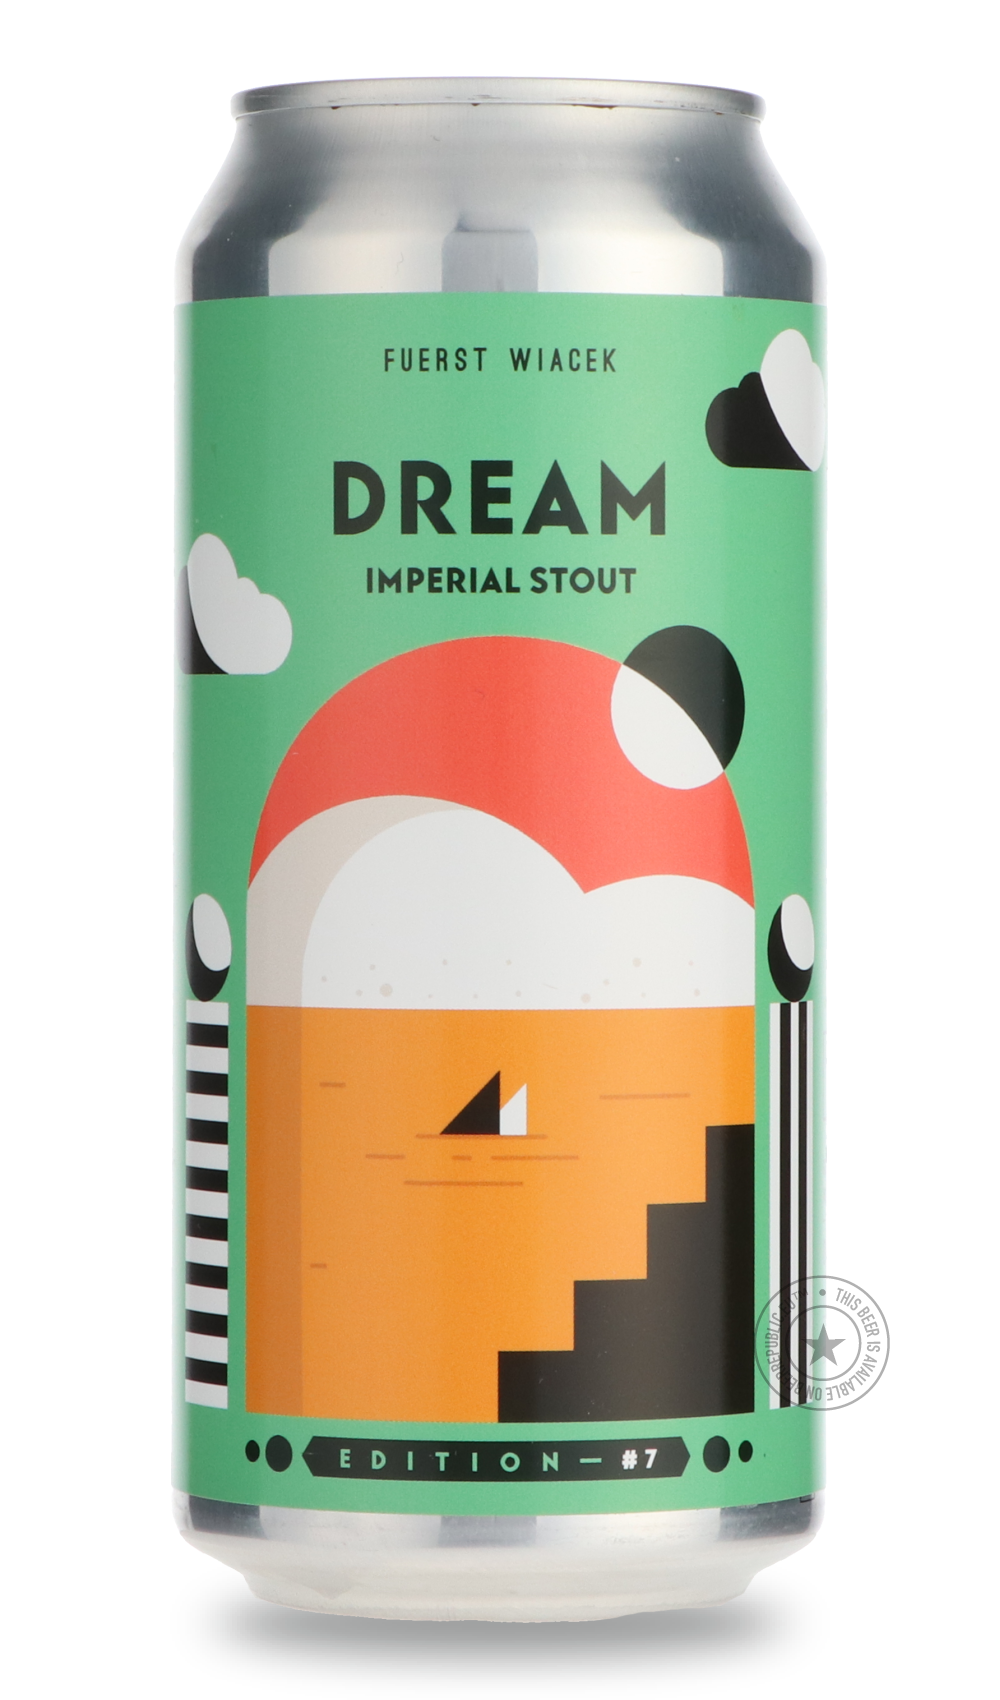 -Fuerst Wiacek- Dream #7-Stout & Porter- Only @ Beer Republic - The best online beer store for American & Canadian craft beer - Buy beer online from the USA and Canada - Bier online kopen - Amerikaans bier kopen - Craft beer store - Craft beer kopen - Amerikanisch bier kaufen - Bier online kaufen - Acheter biere online - IPA - Stout - Porter - New England IPA - Hazy IPA - Imperial Stout - Barrel Aged - Barrel Aged Imperial Stout - Brown - Dark beer - Blond - Blonde - Pilsner - Lager - Wheat - Weizen - Amber